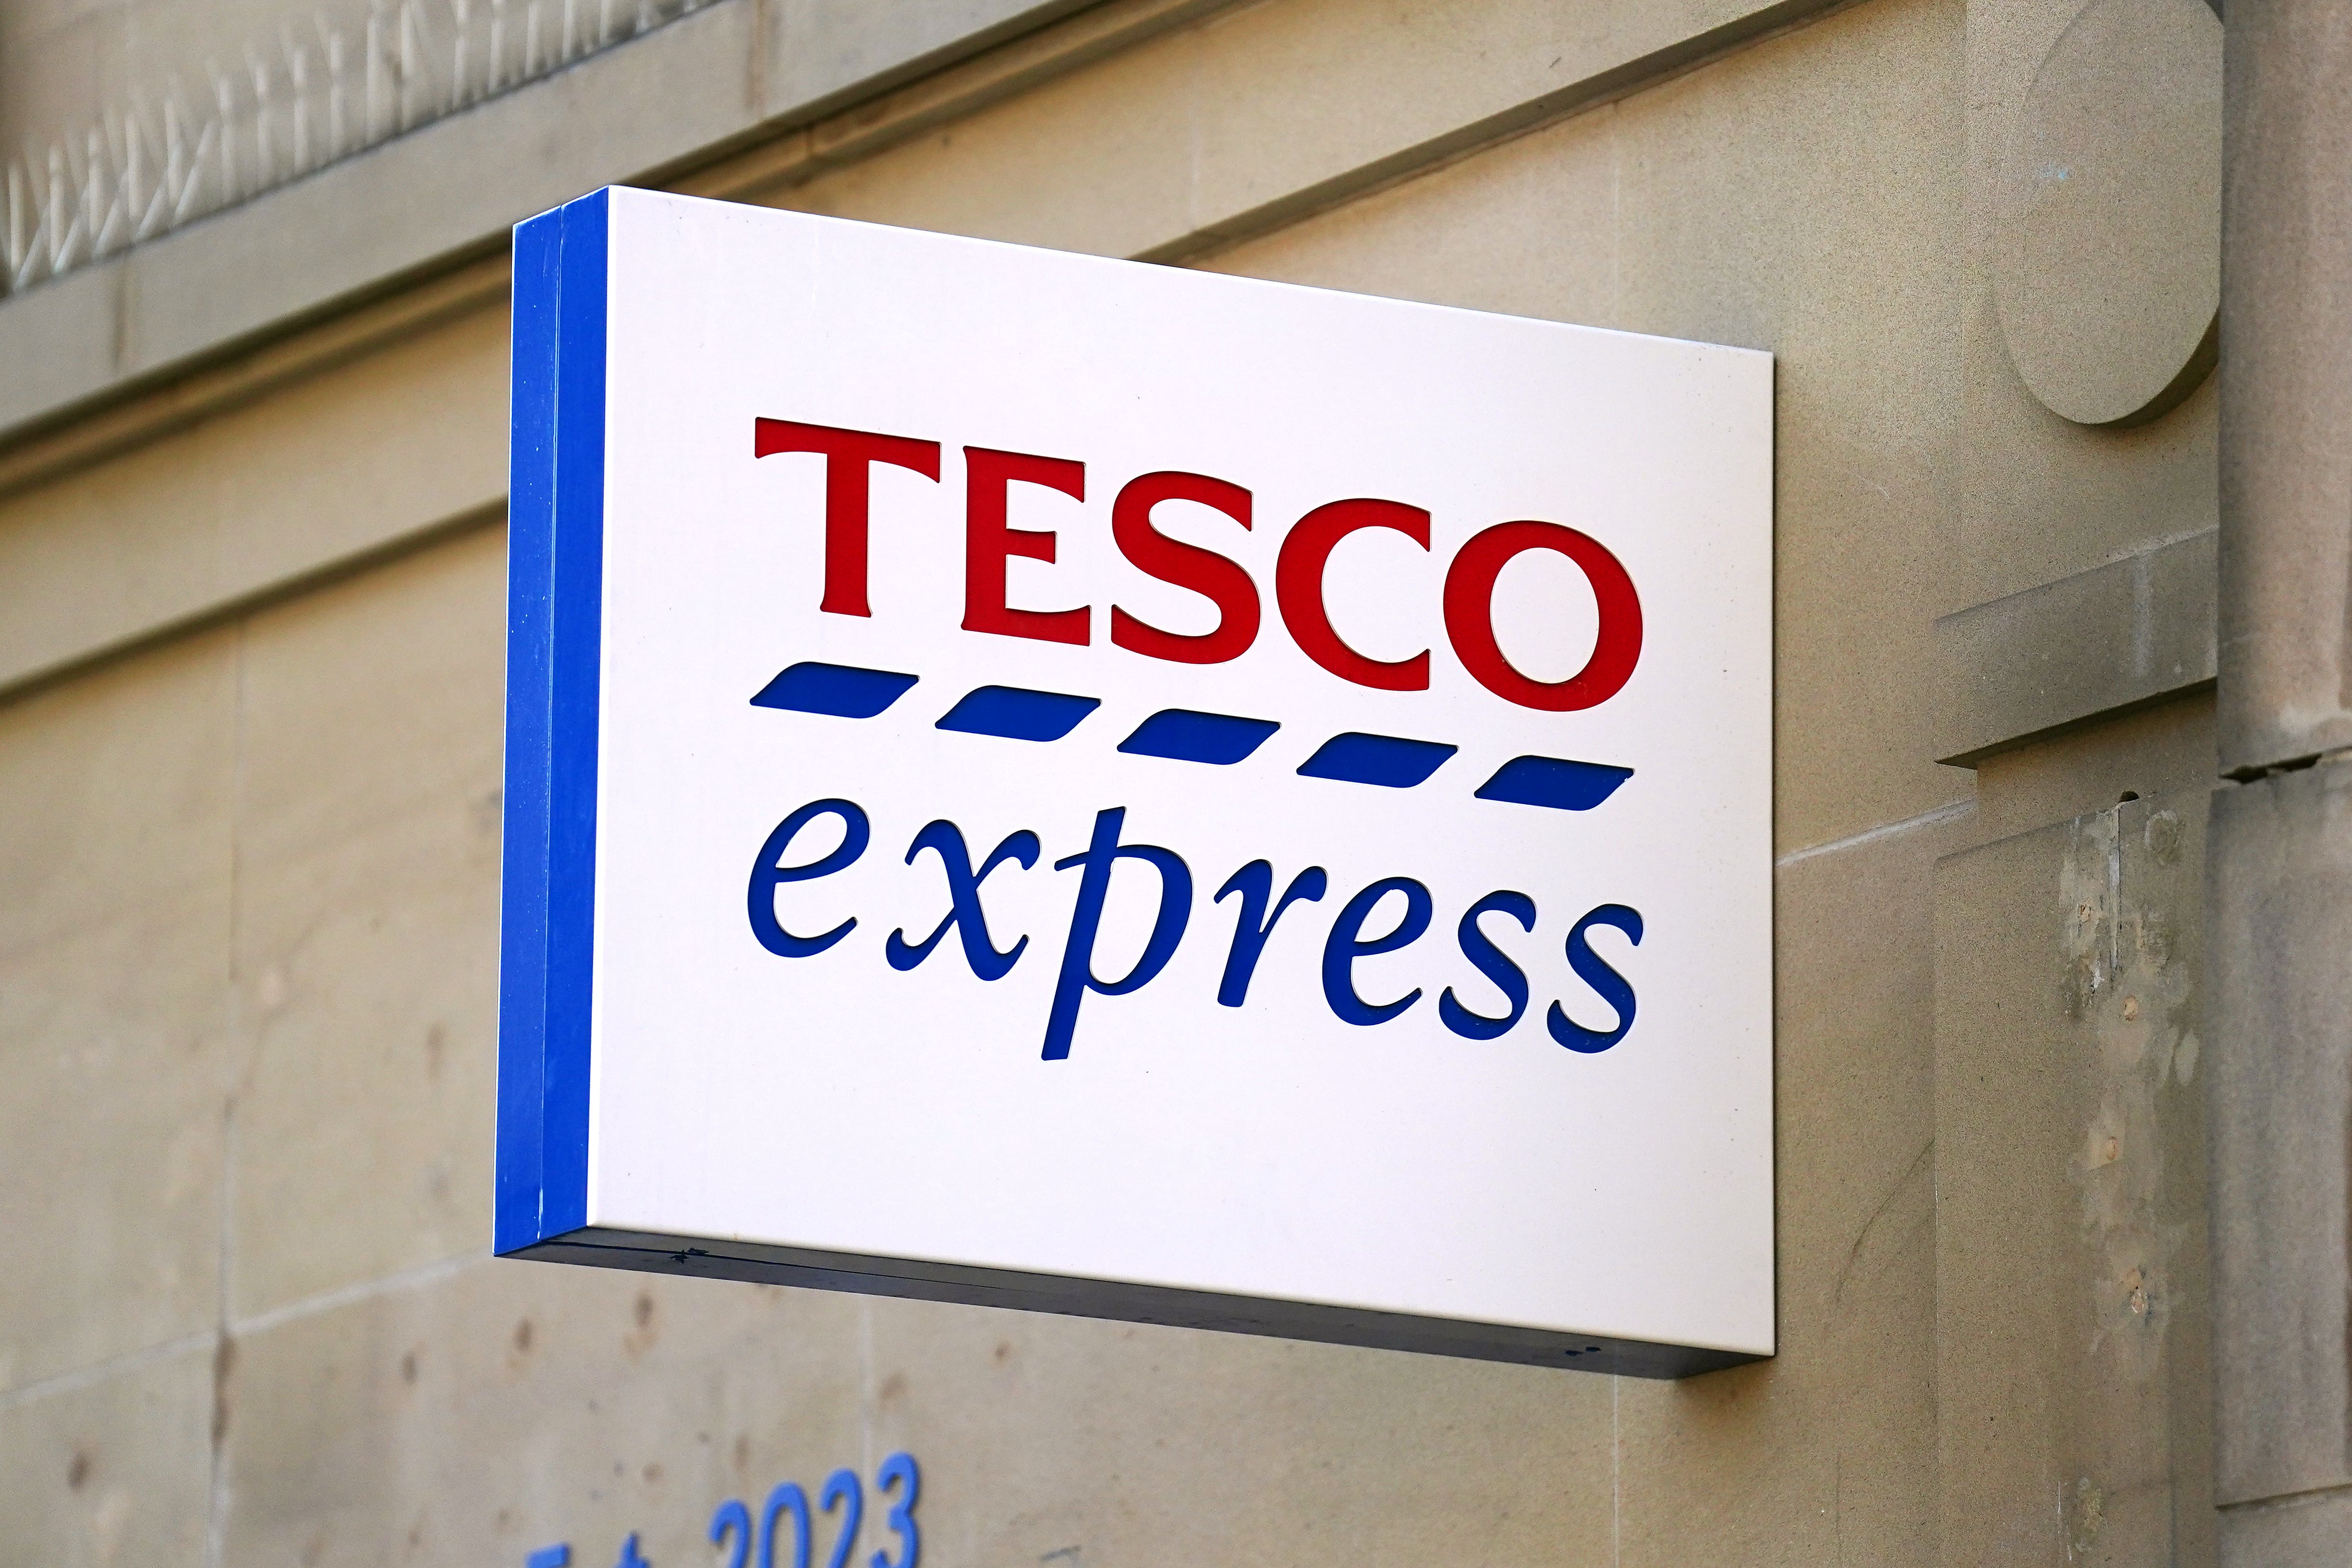 Tesco Express stores in England will close early on Sunday if England reach the Euro 2024 final (PA)